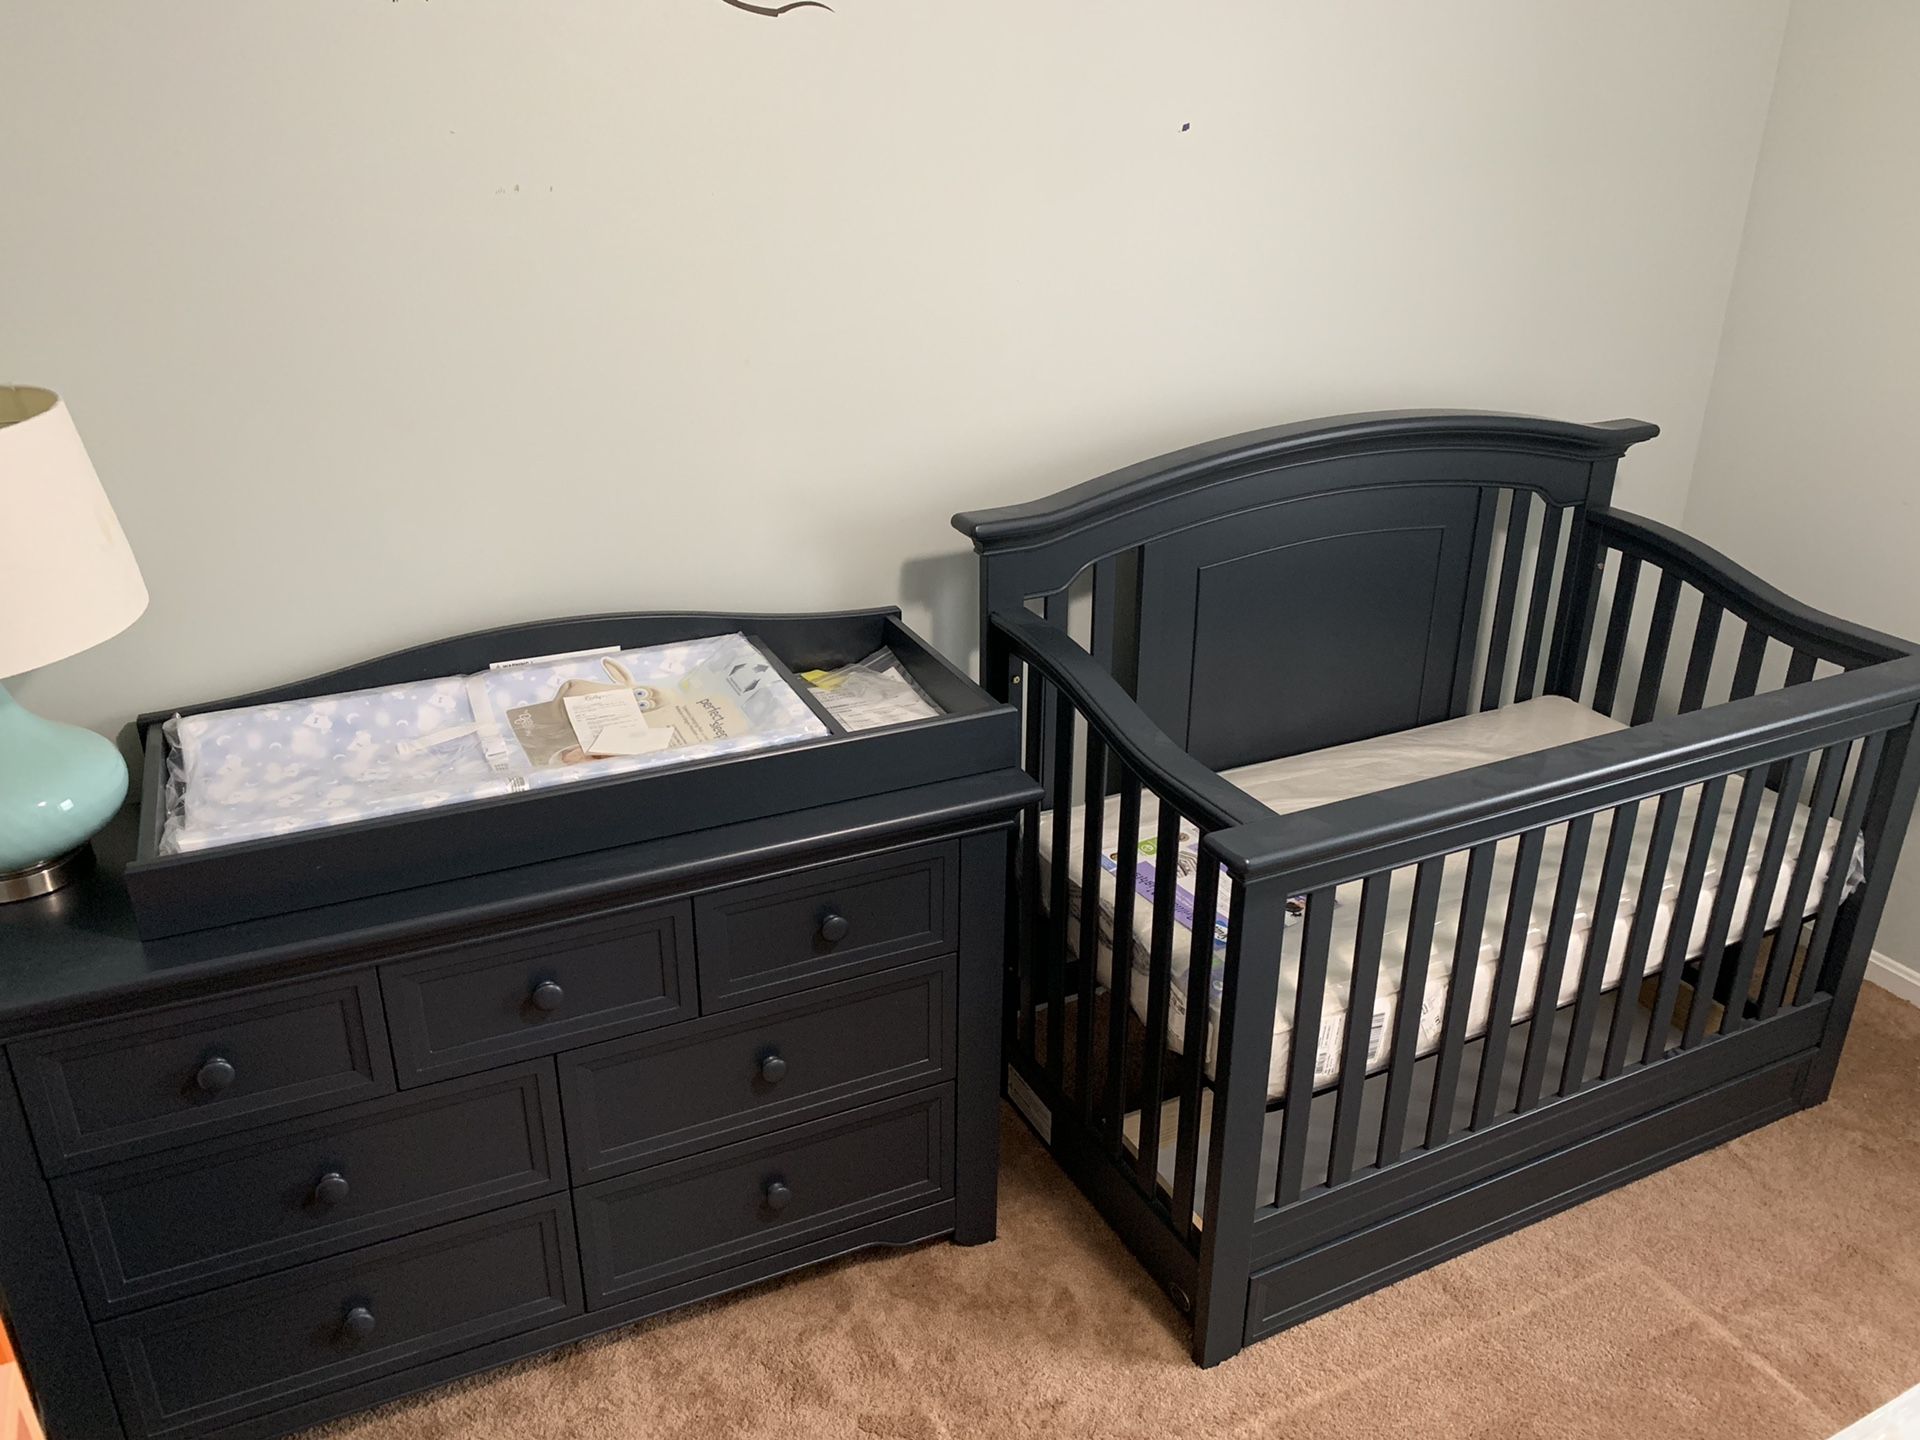 Cache Harbor – Navy Mist – 7 Drawer Dresser w/ changing table top, crib, and conversion kit